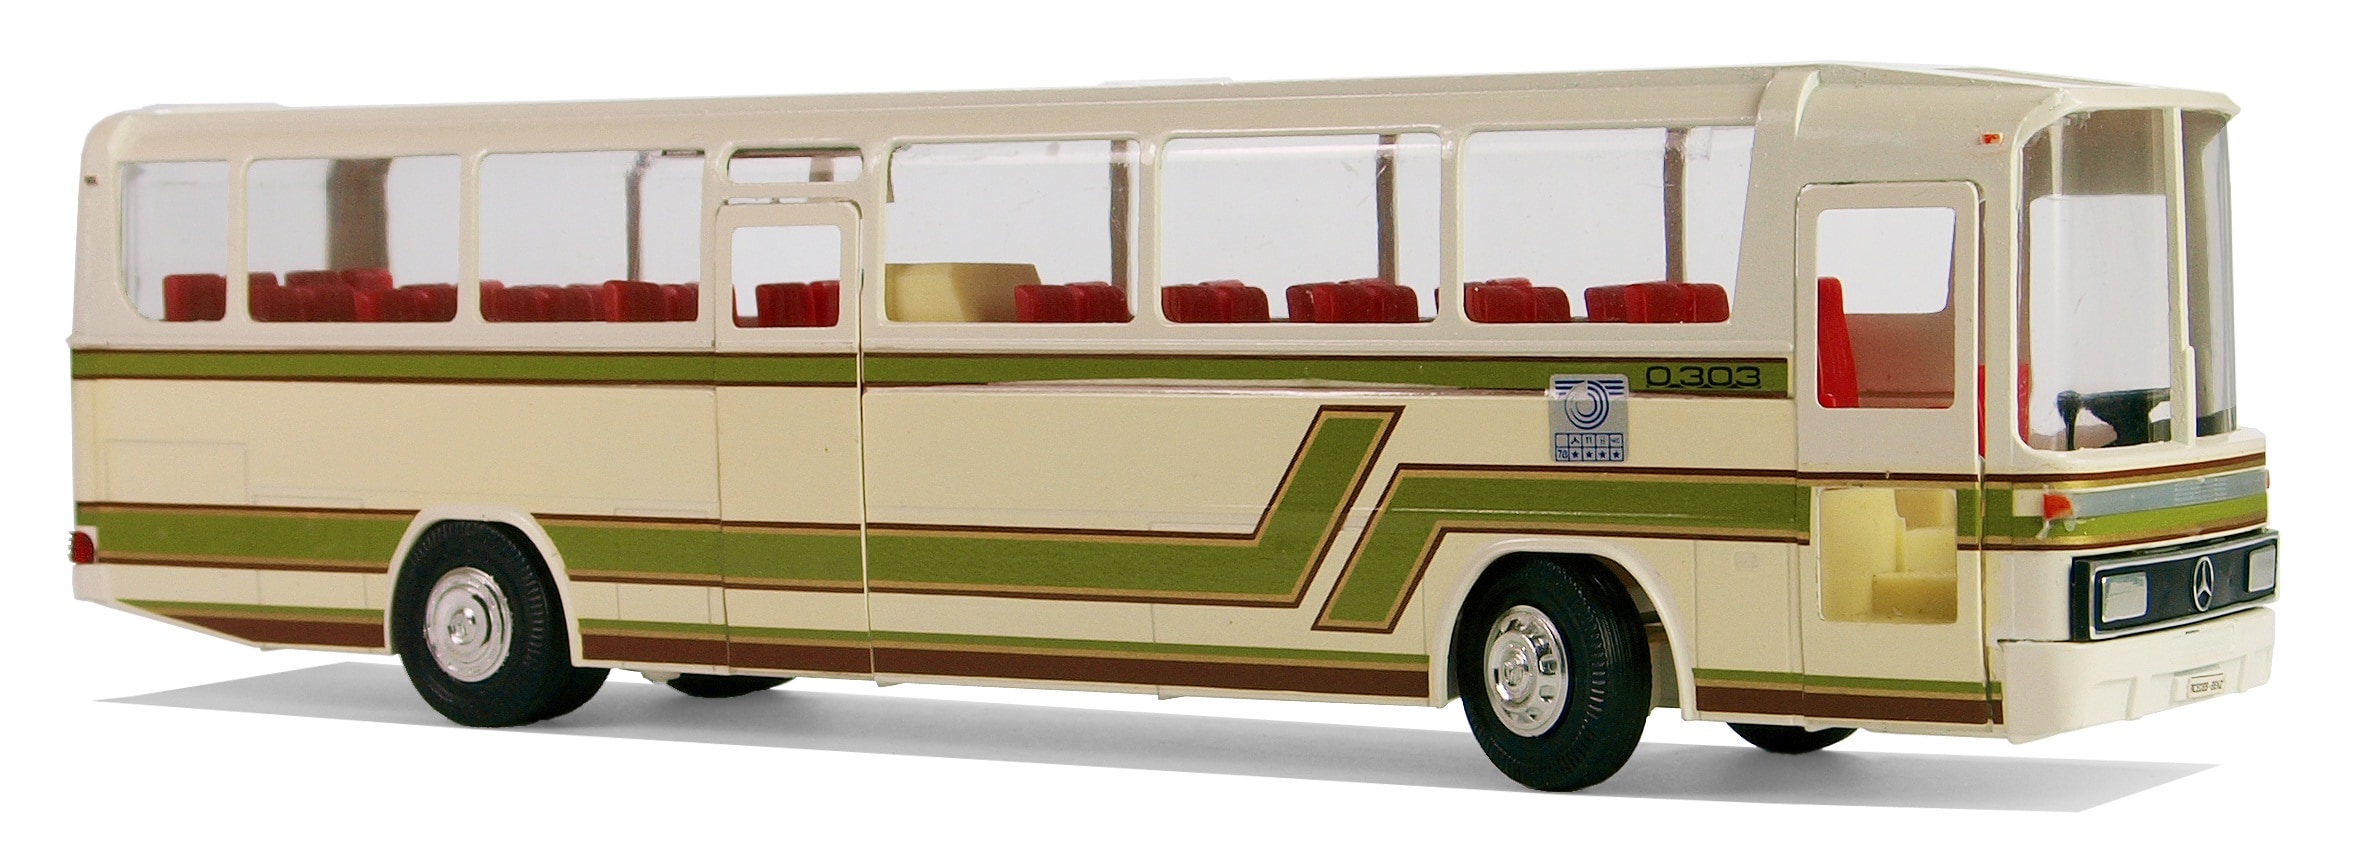 beige and green commuter bus illustration